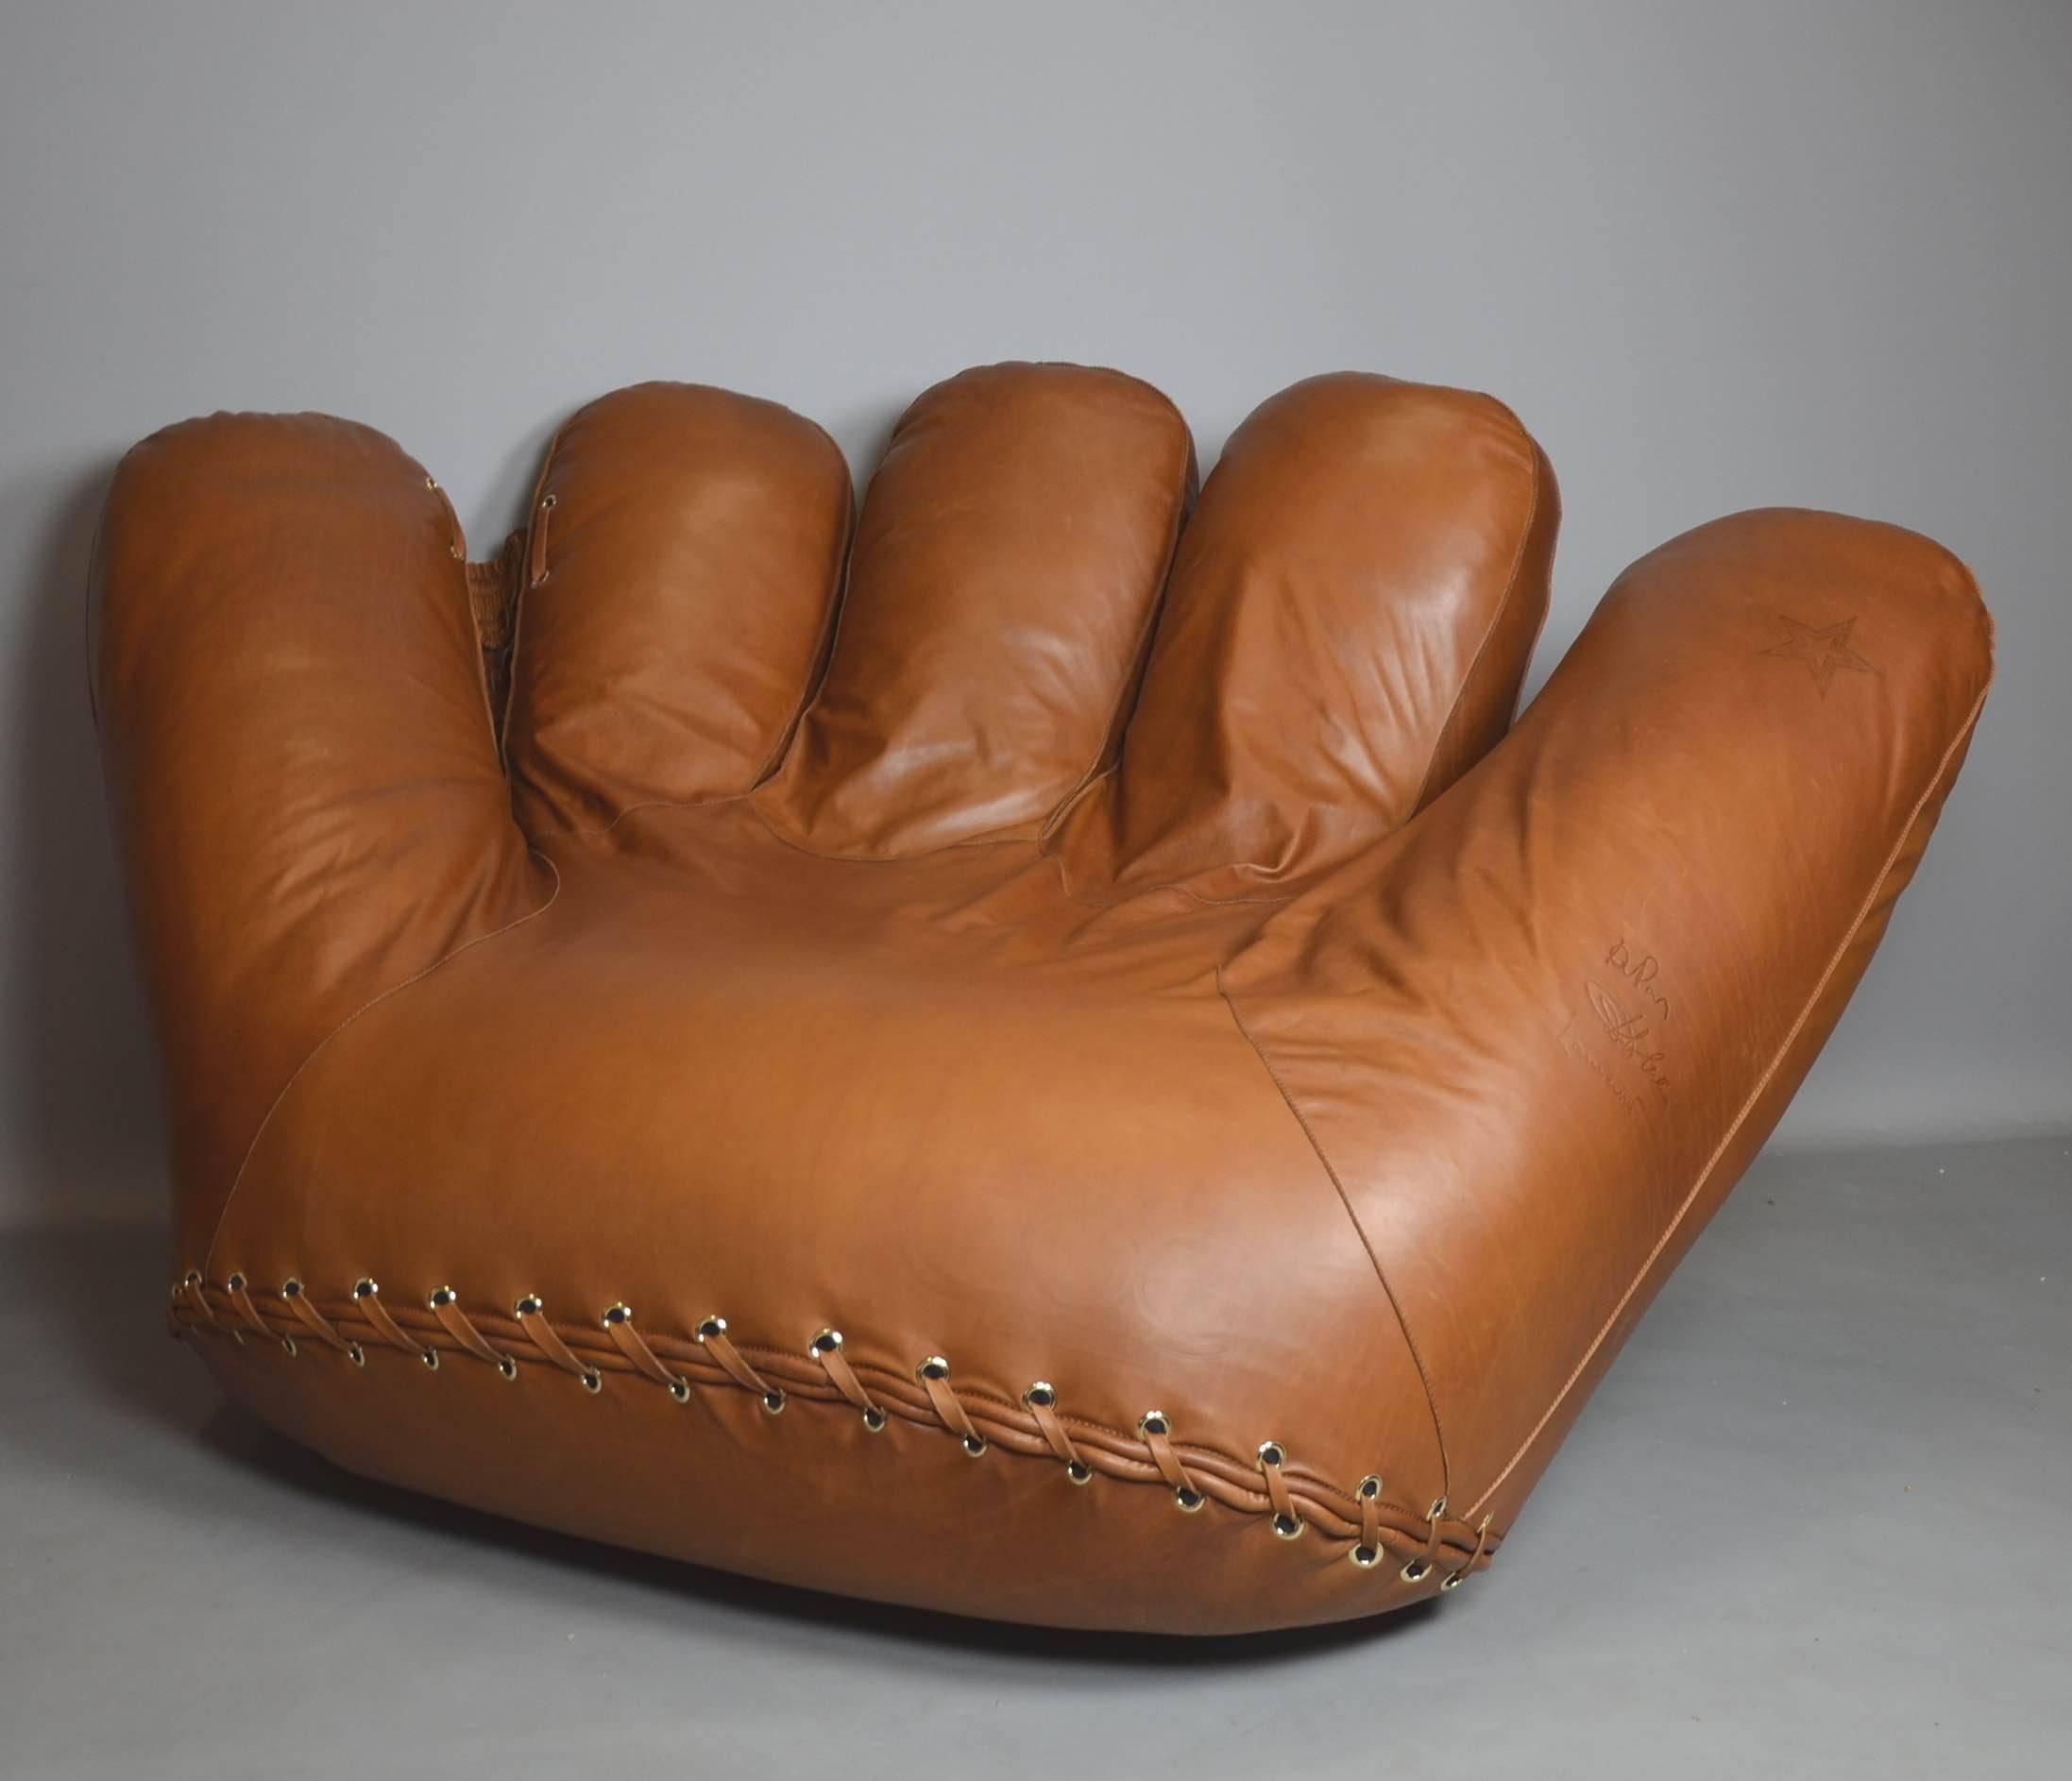 Designed by Studio DDL-De Pas D'urbino Lomazzi in 1968, produced by Poltronova, Italy. Metal frame with polyurethane foam and upholstery in cognac anilin leather. This Joe is made in a unique leather quality.